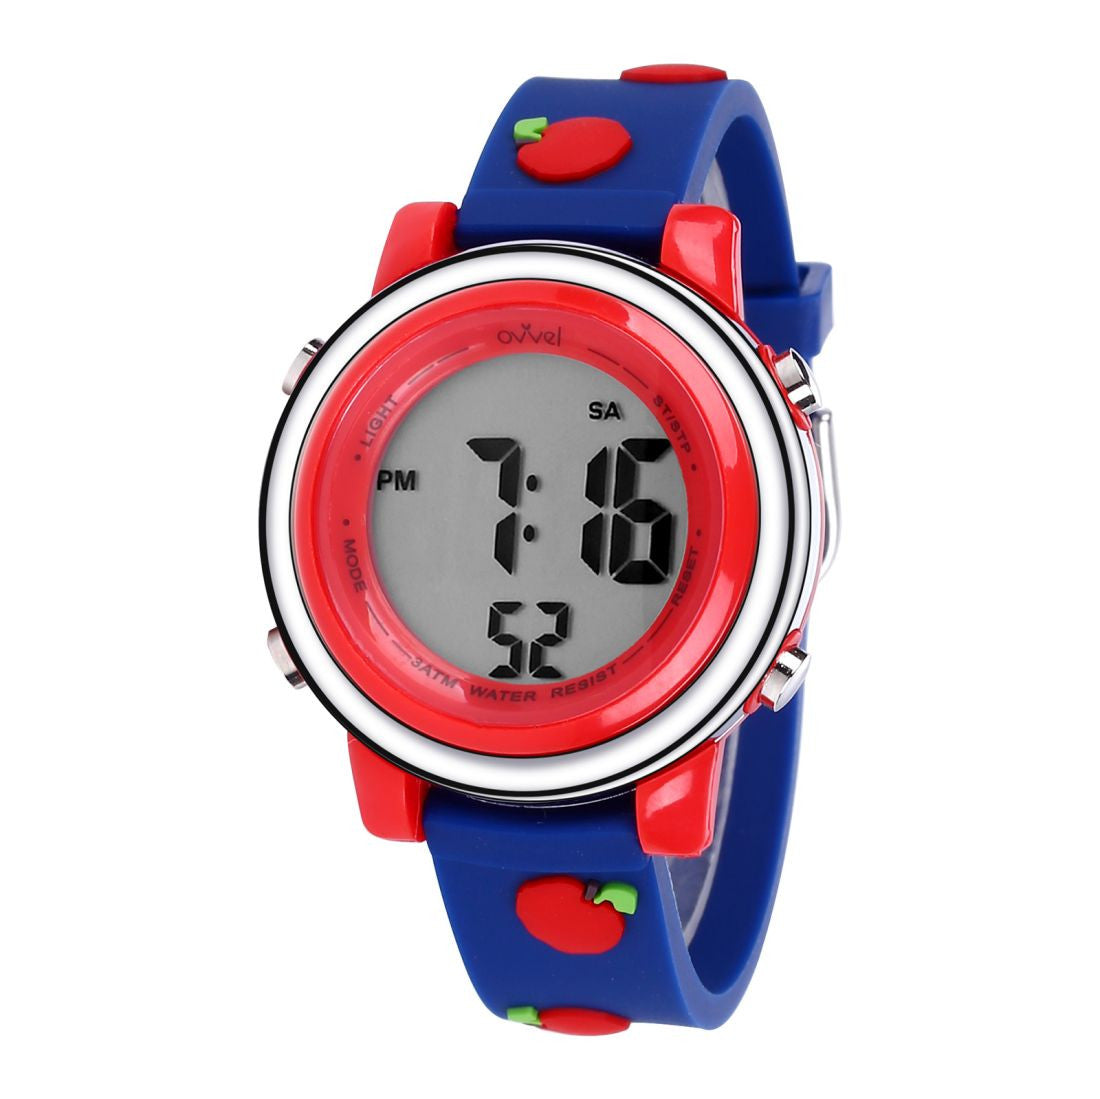 Girls Digital Sports Watch with many features - Red Apples